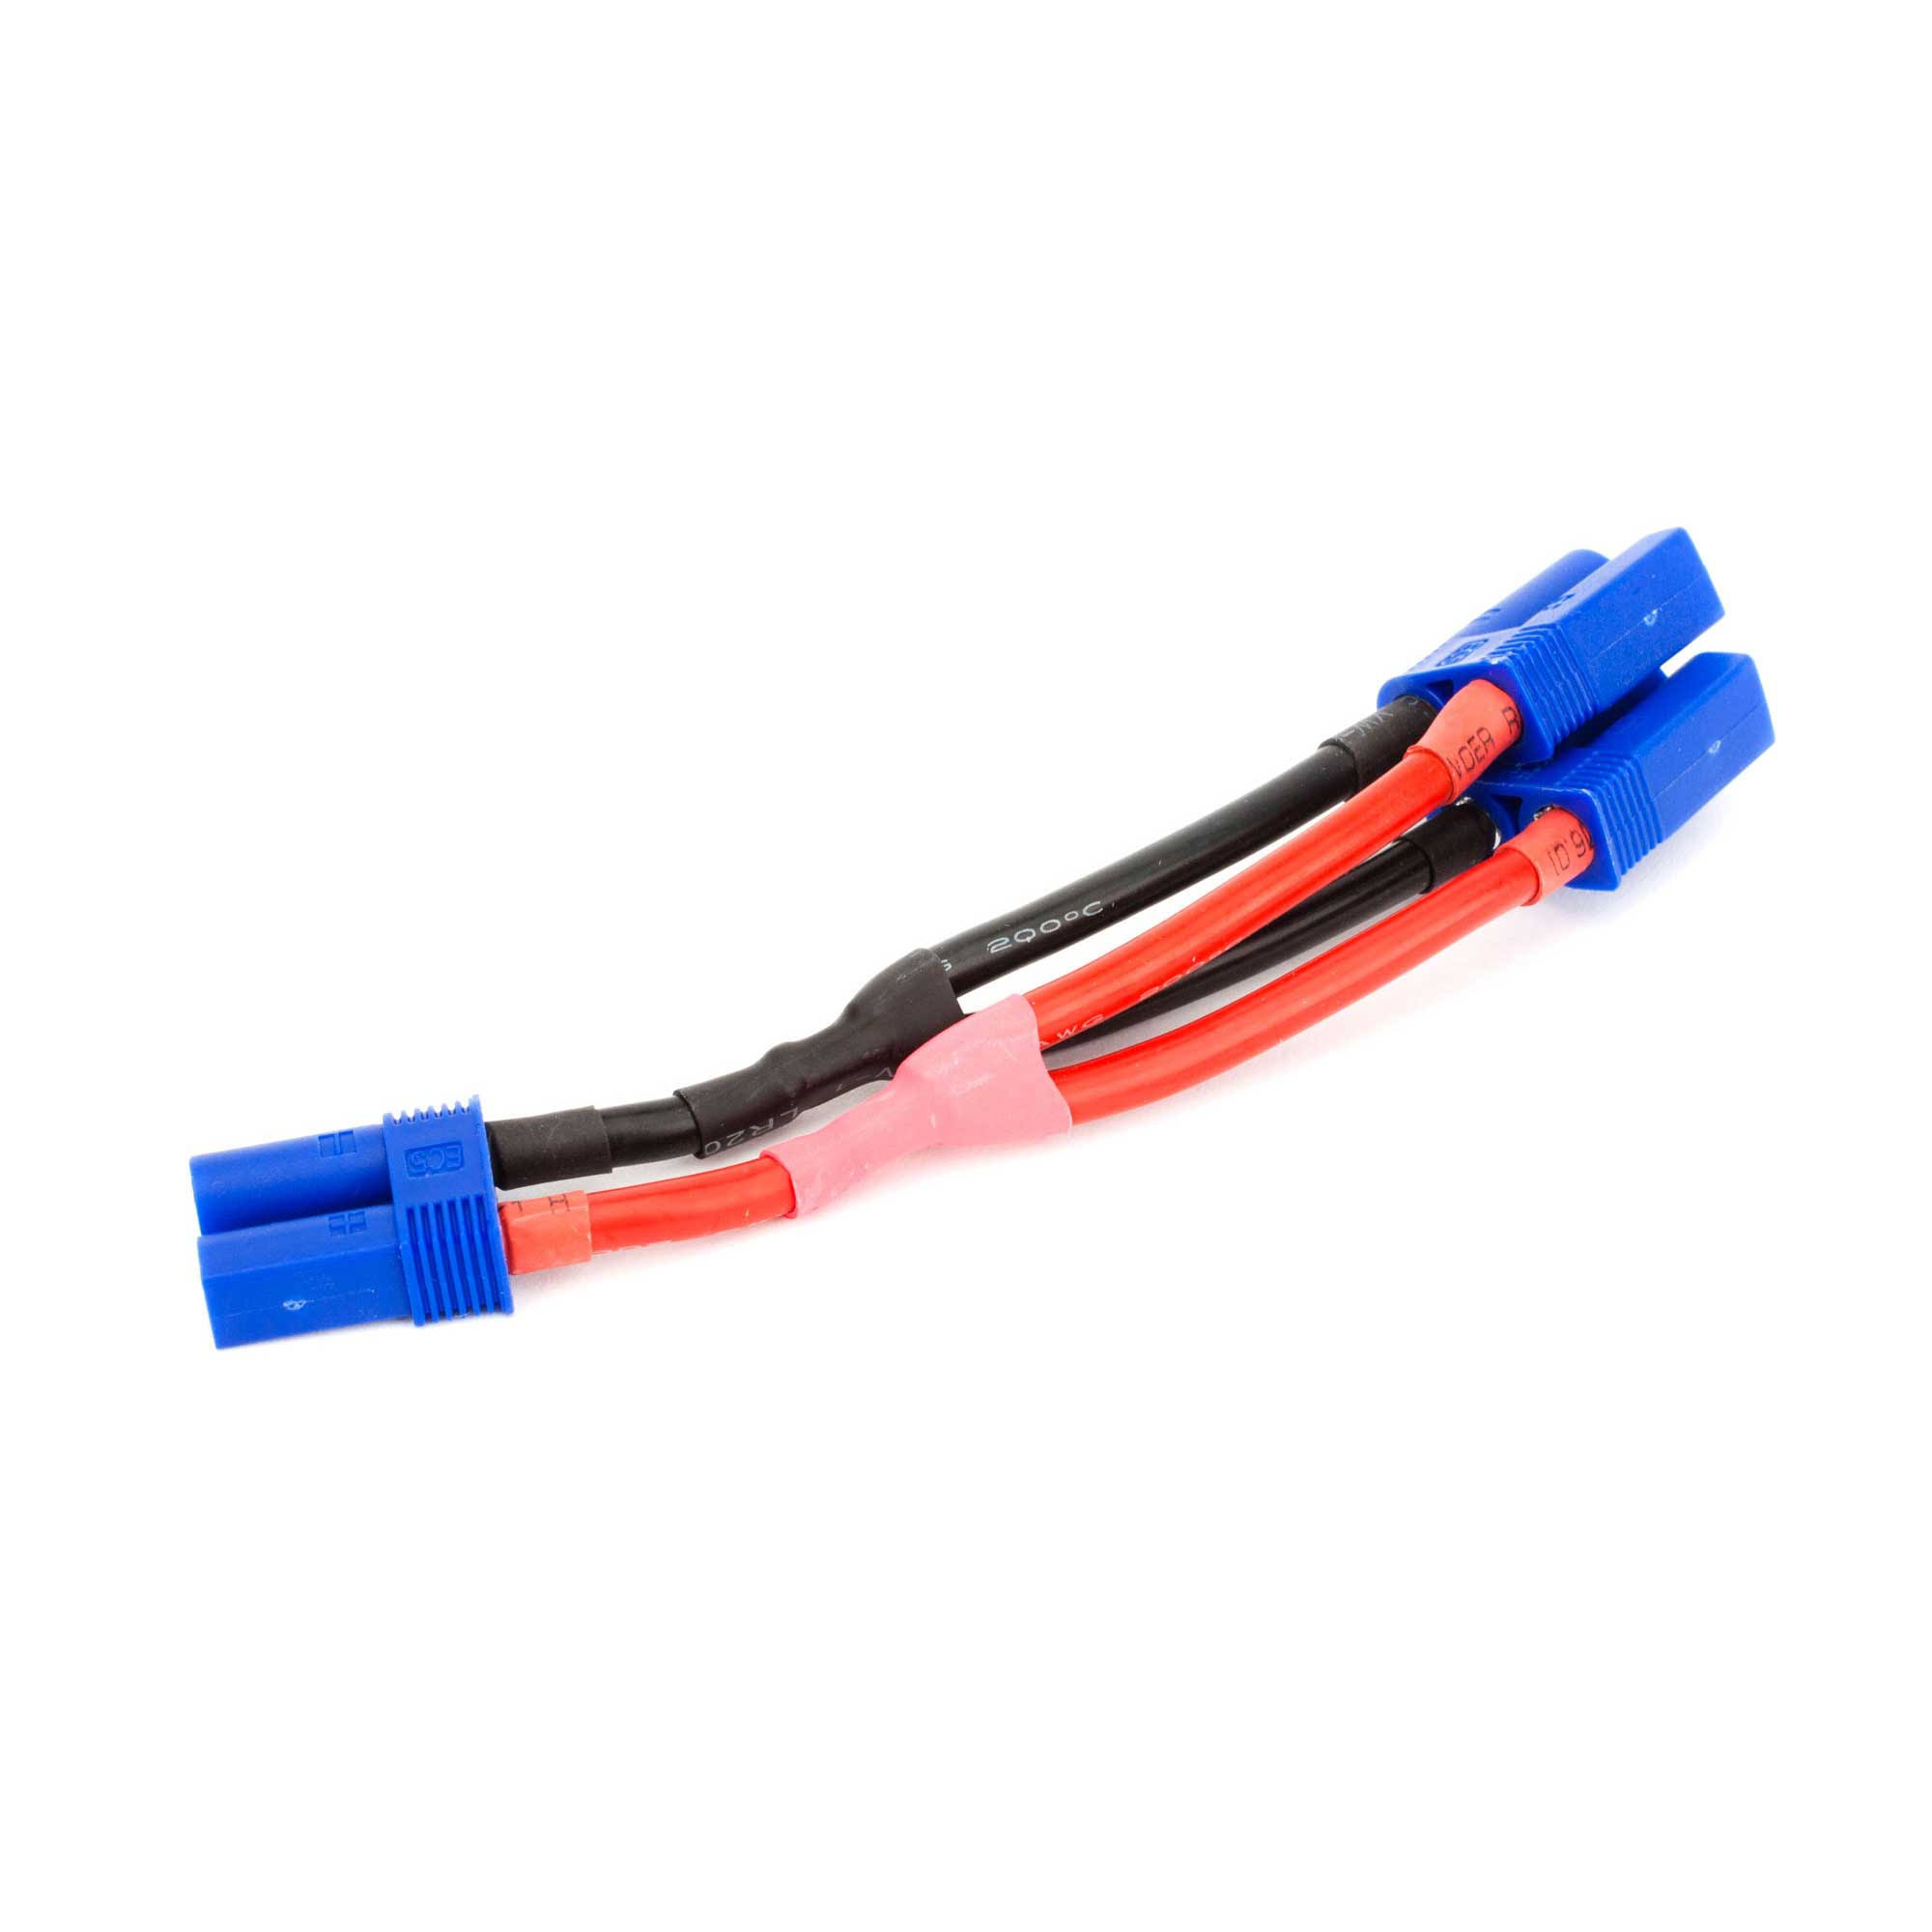 E Flite Ec5 Connector Plug Battery Parallel Y Harness - 10 Awg